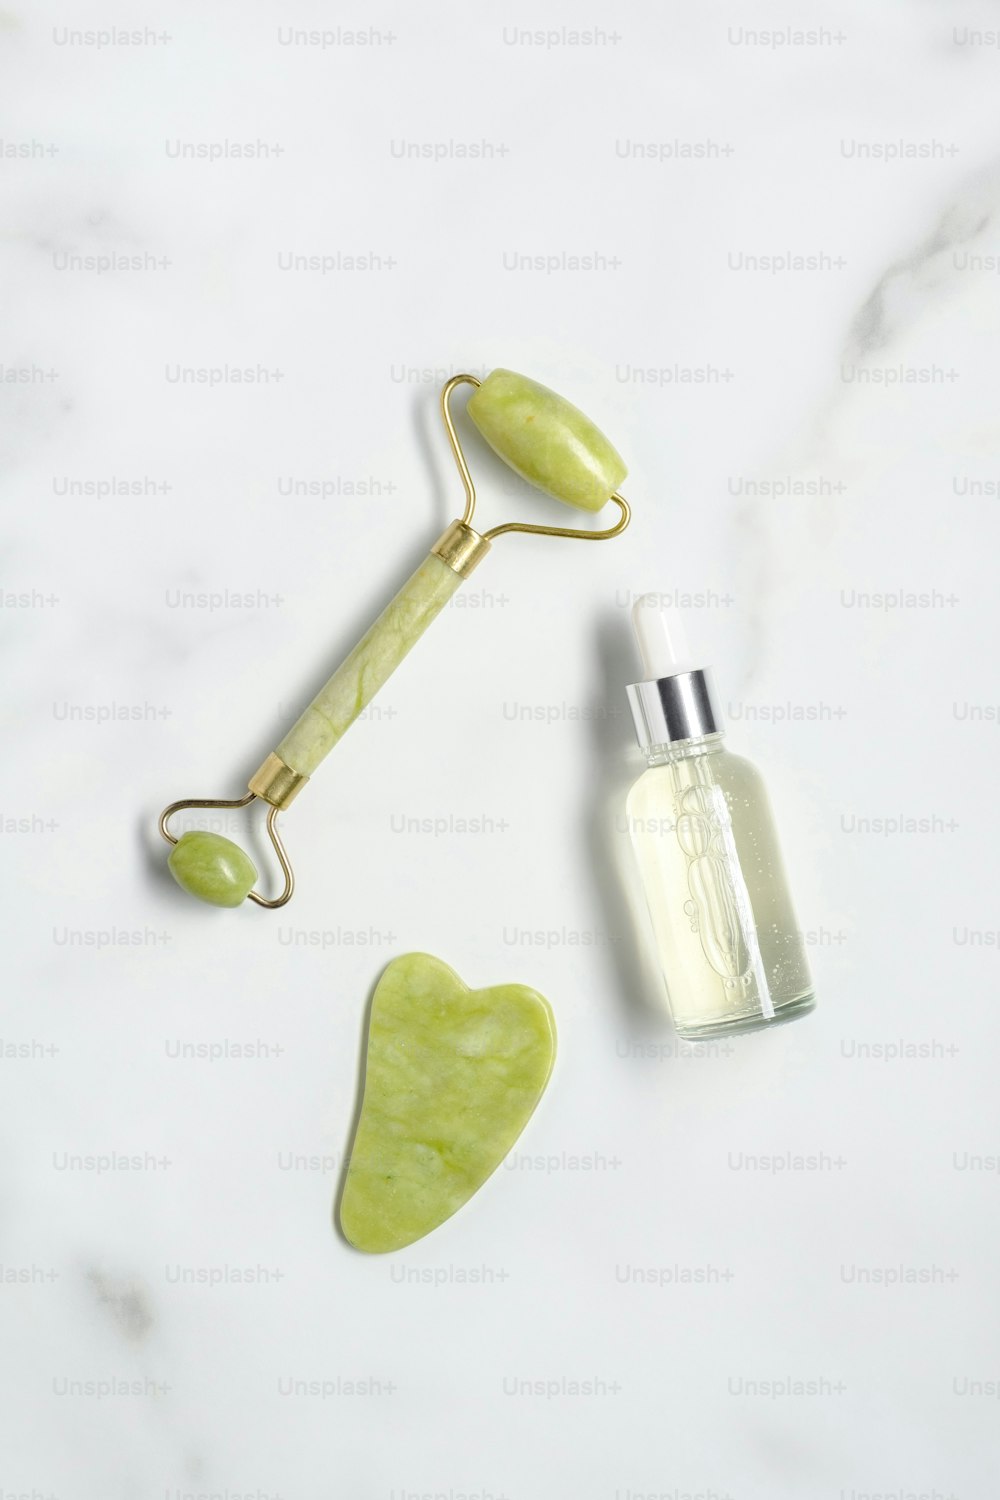 Jade stone facial roller, gua sha, serum lotion on marble table. Facial skin care cosmetics set. Flat lay, top view.